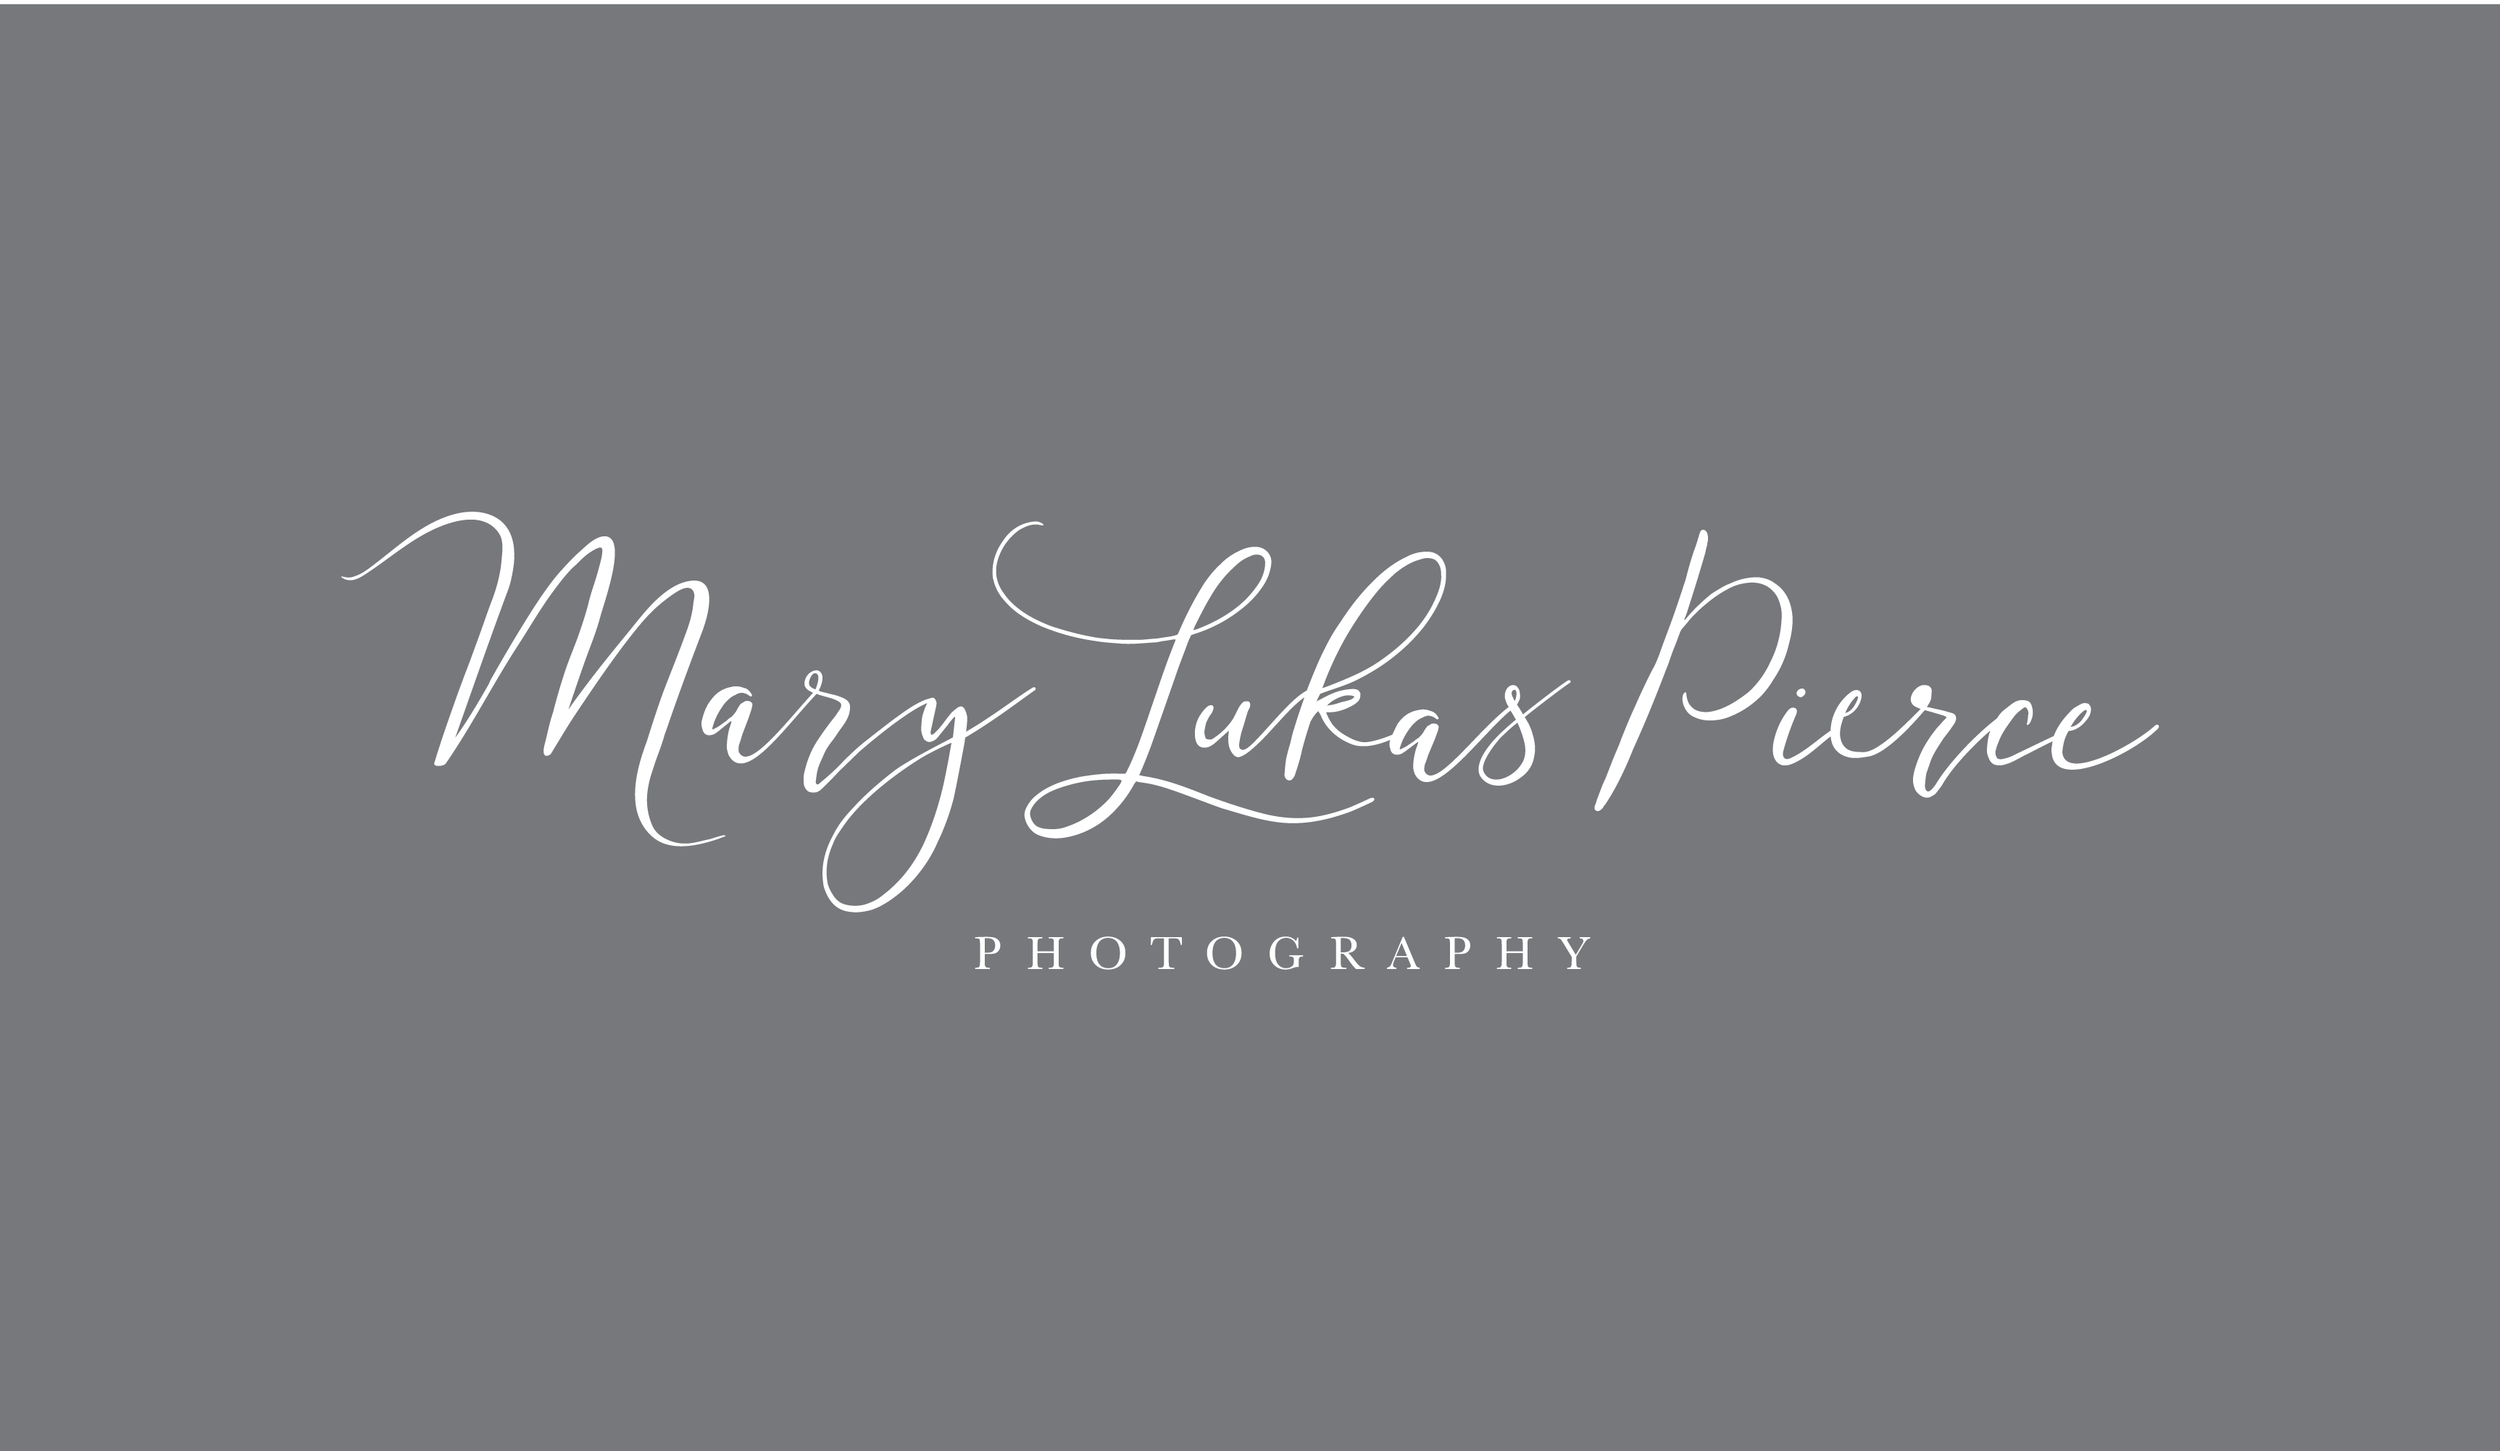 Mary Lukas Pierce Photography Logo and Visual Branding by AllieMarie Design